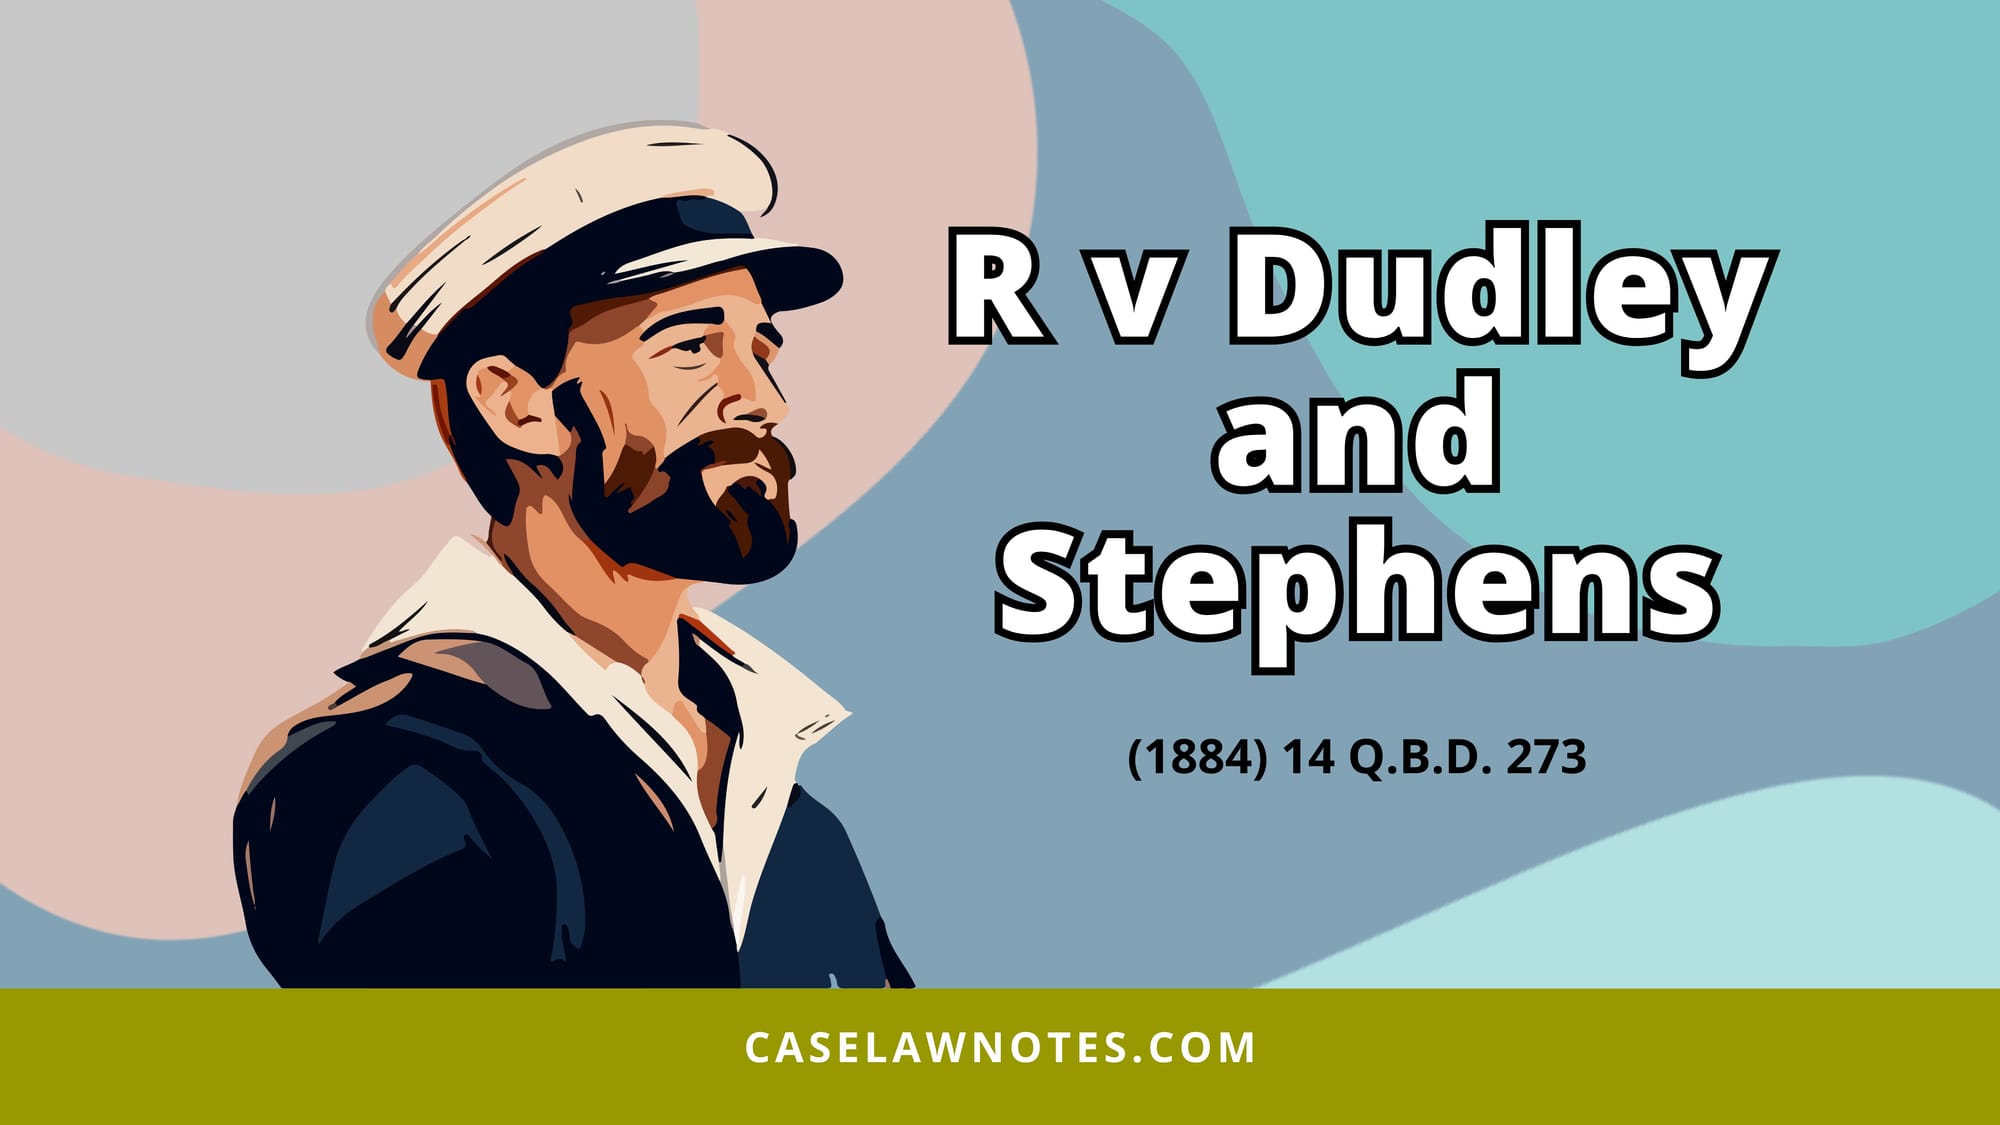 R v Dudley and Stephens